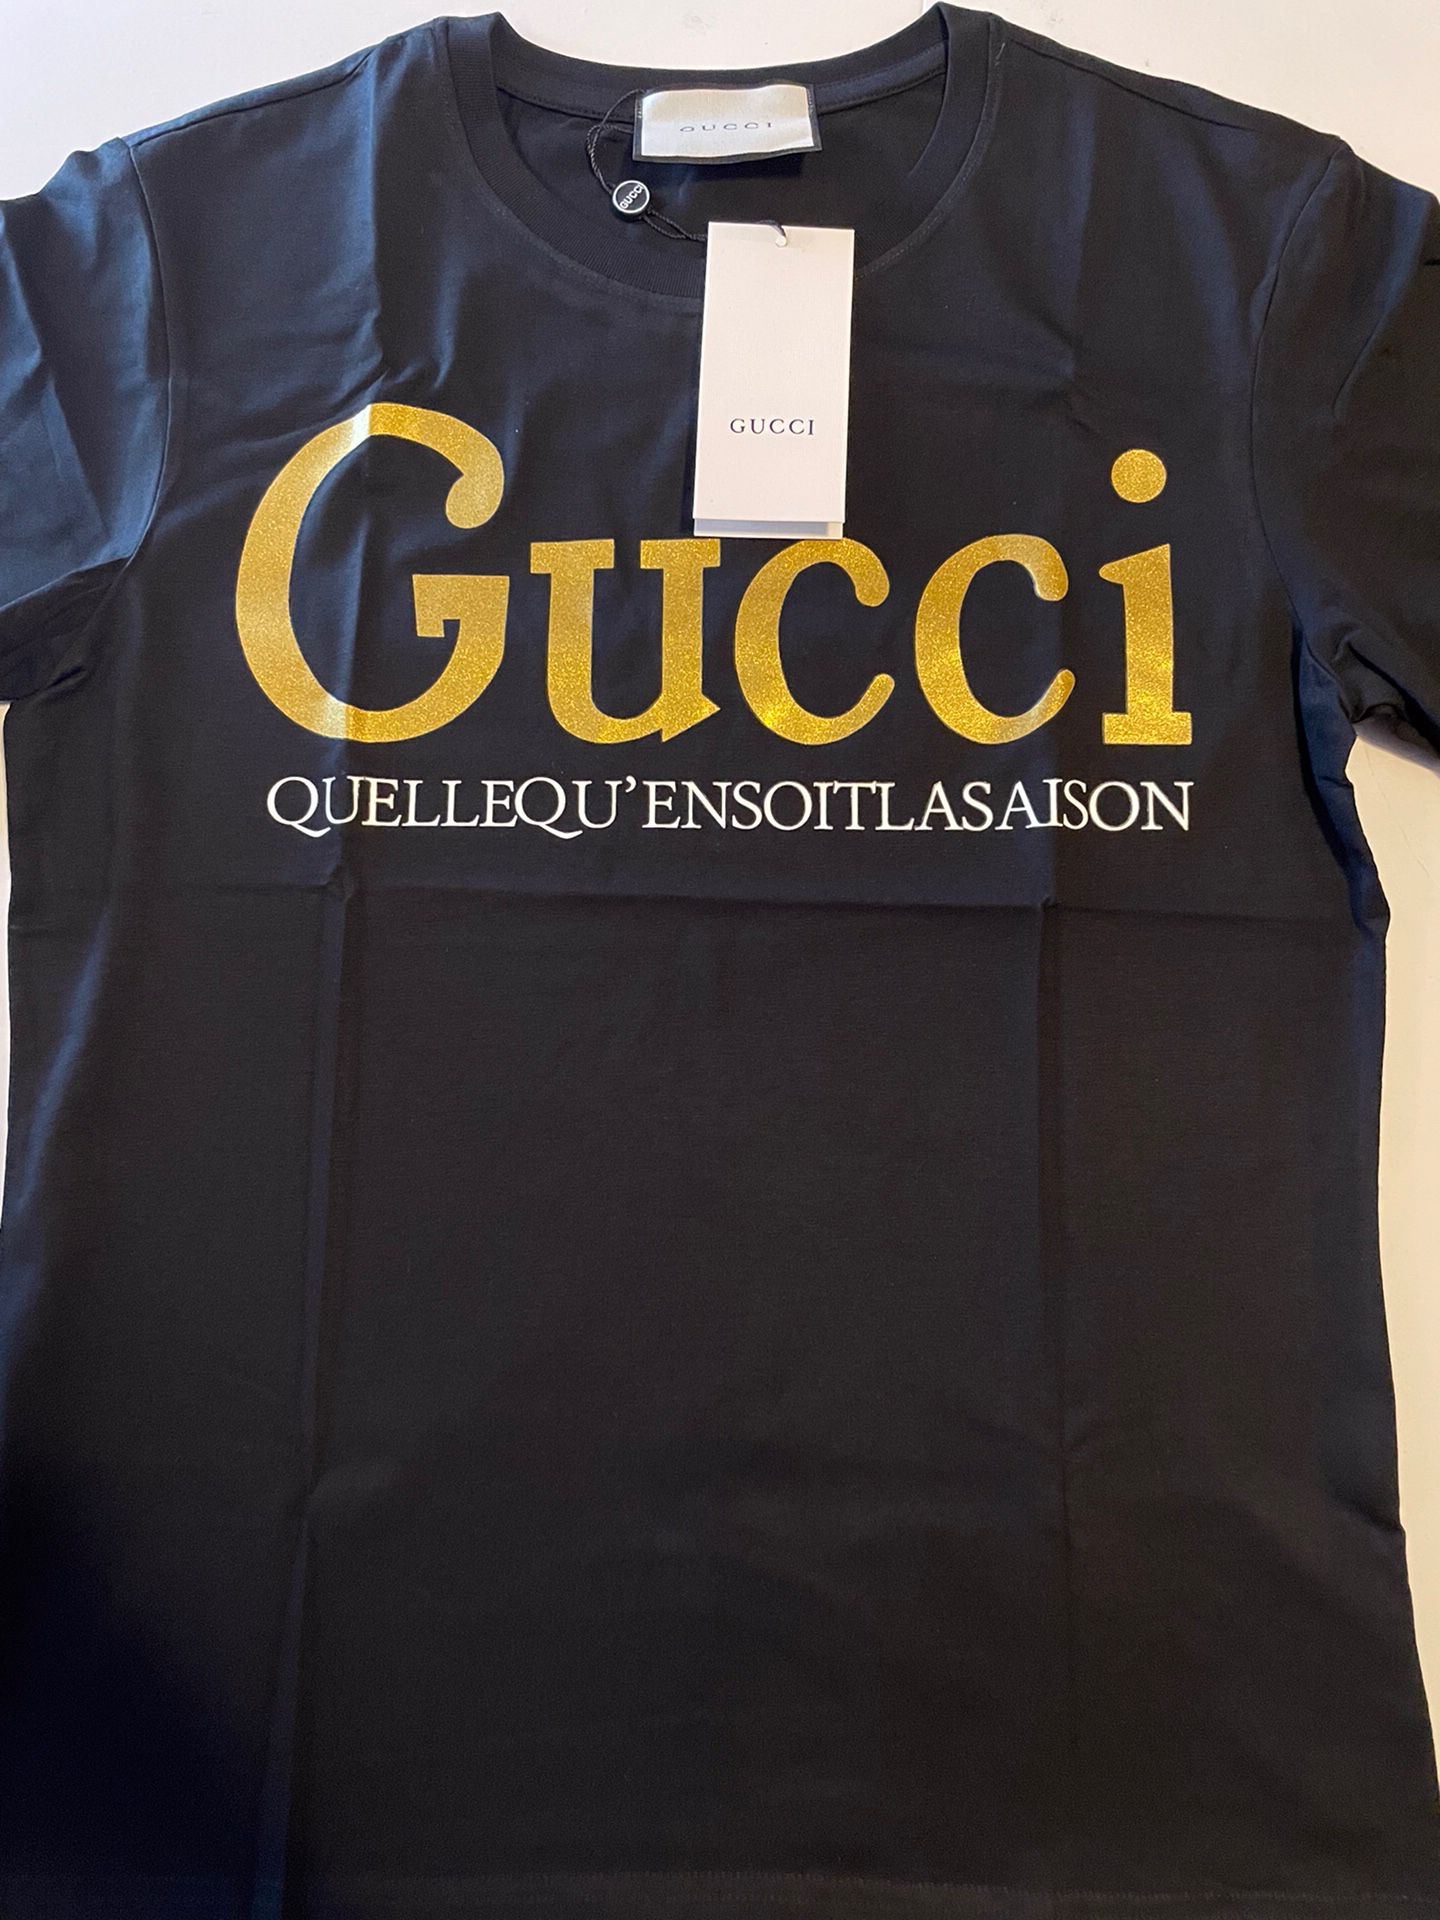 Gucci Tee With Gold Leaf Print